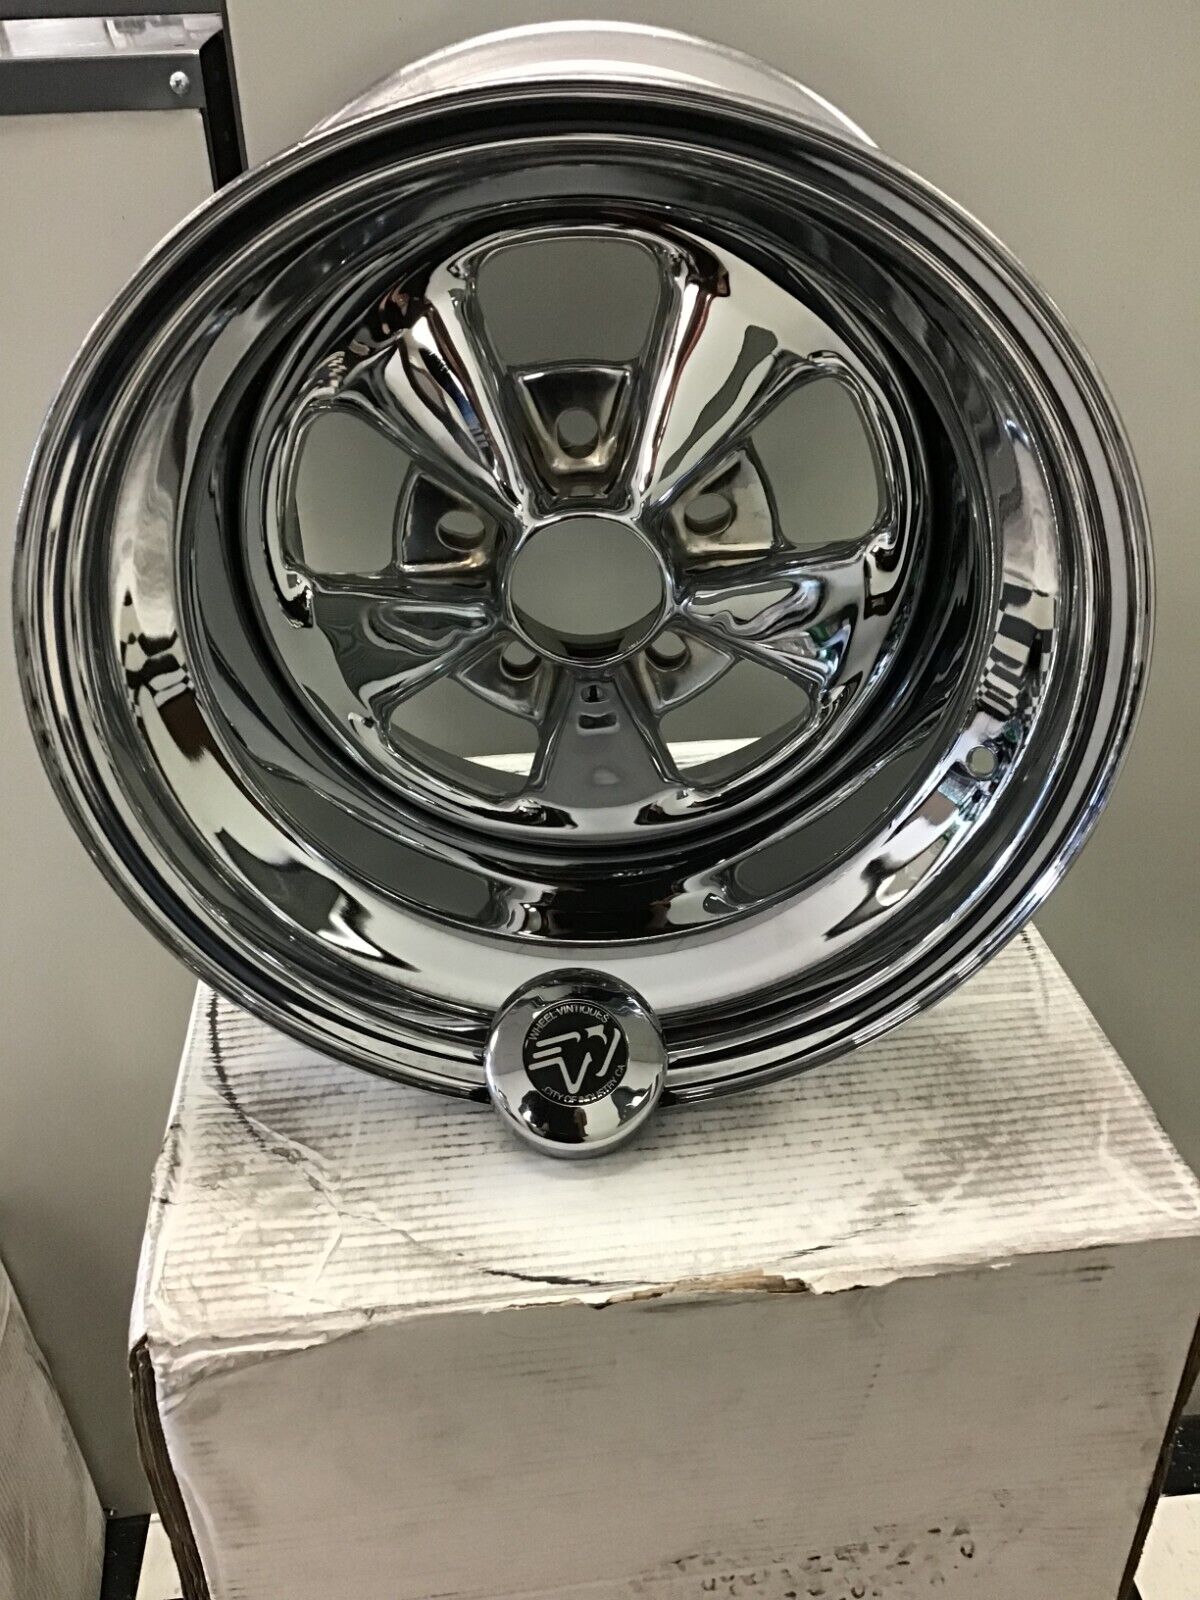 Comet Chrome Wheels 15 x 10 new never installed all 4